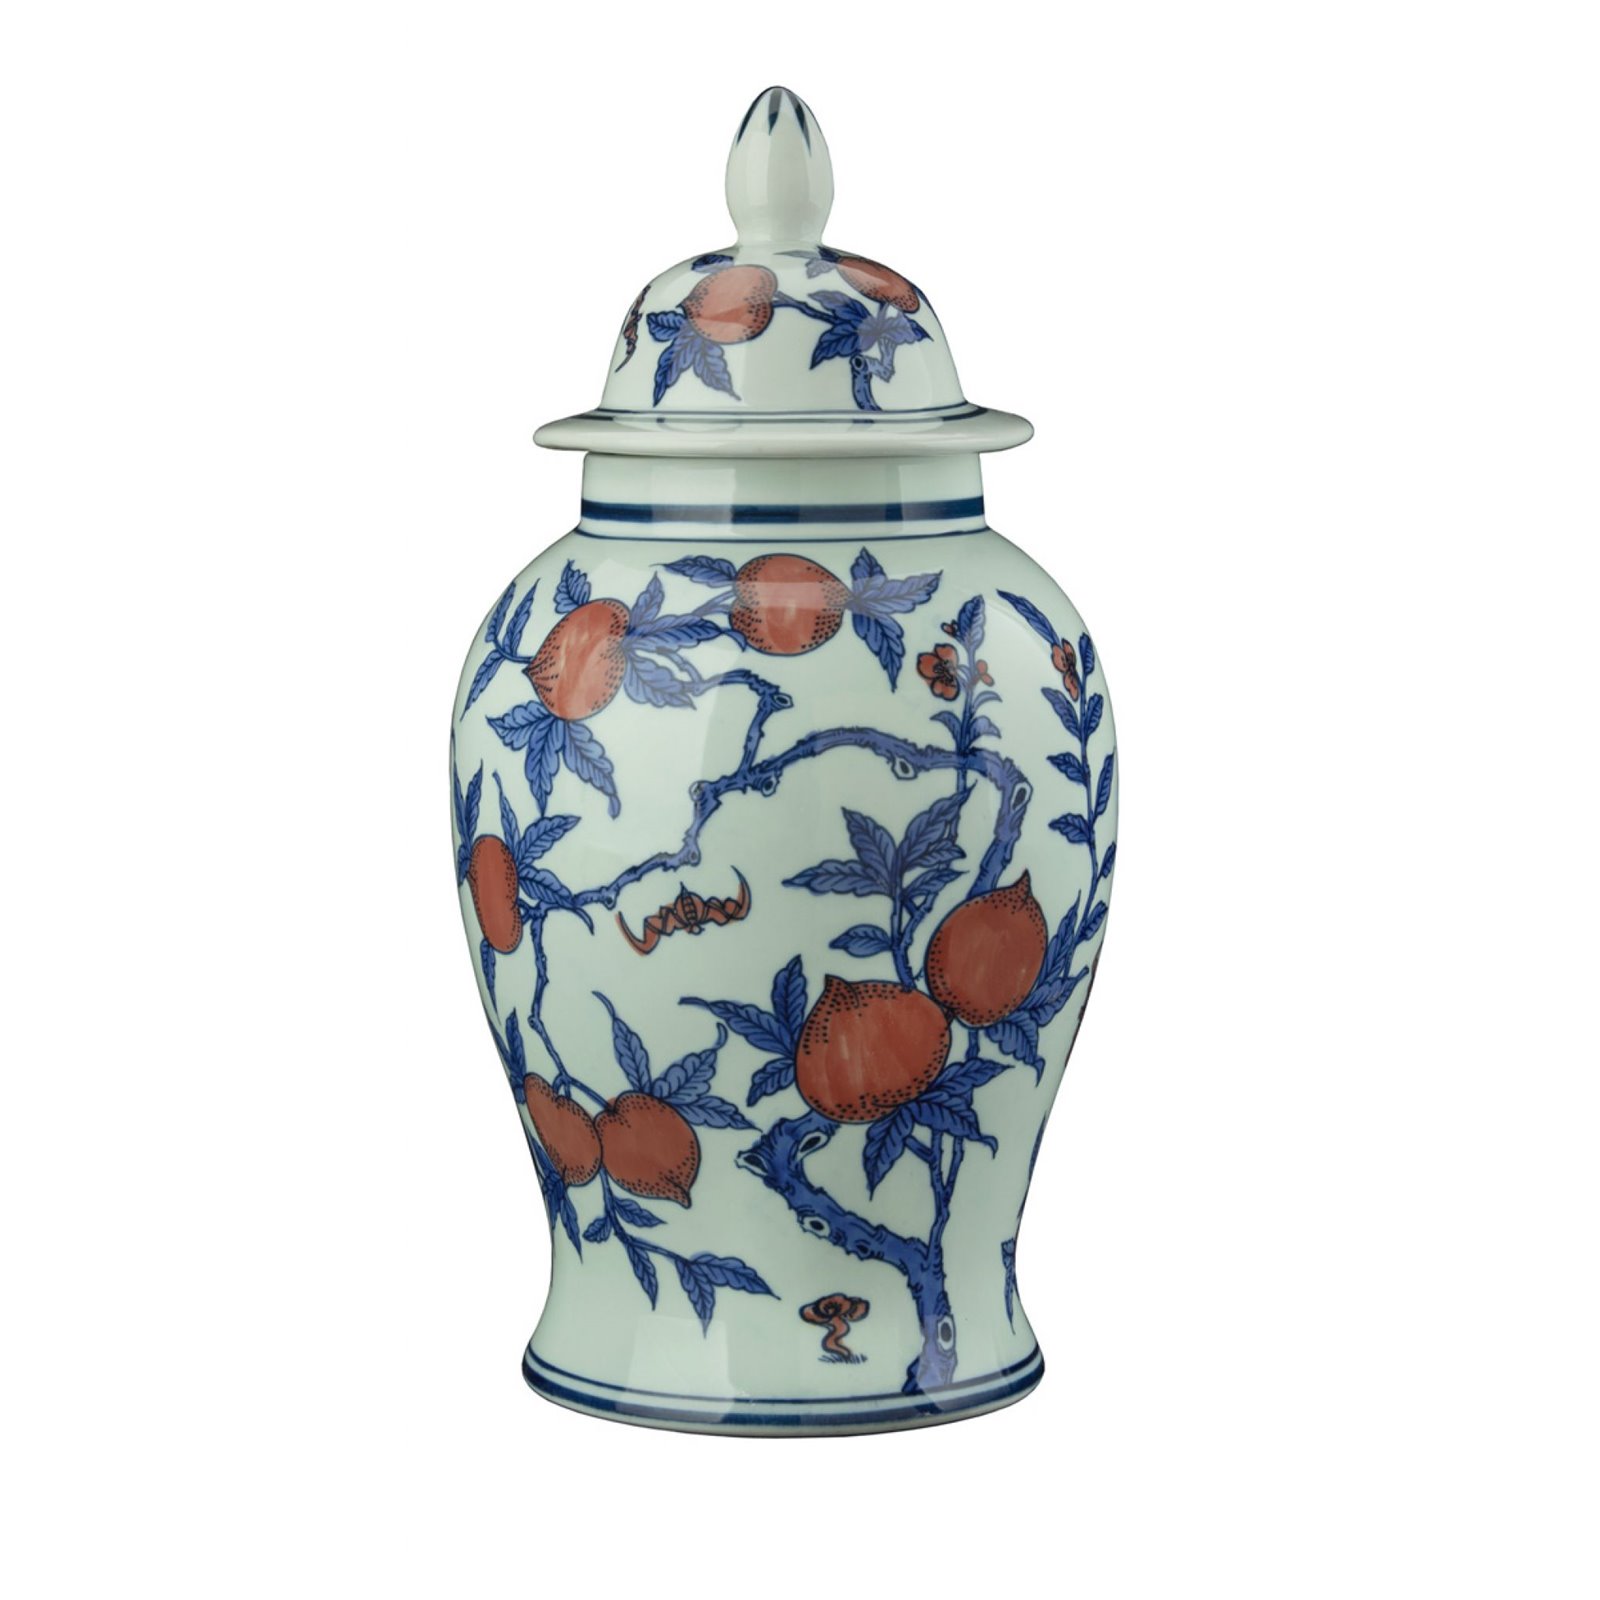 Large Blue and White Peach Fruit Temple Jar Image